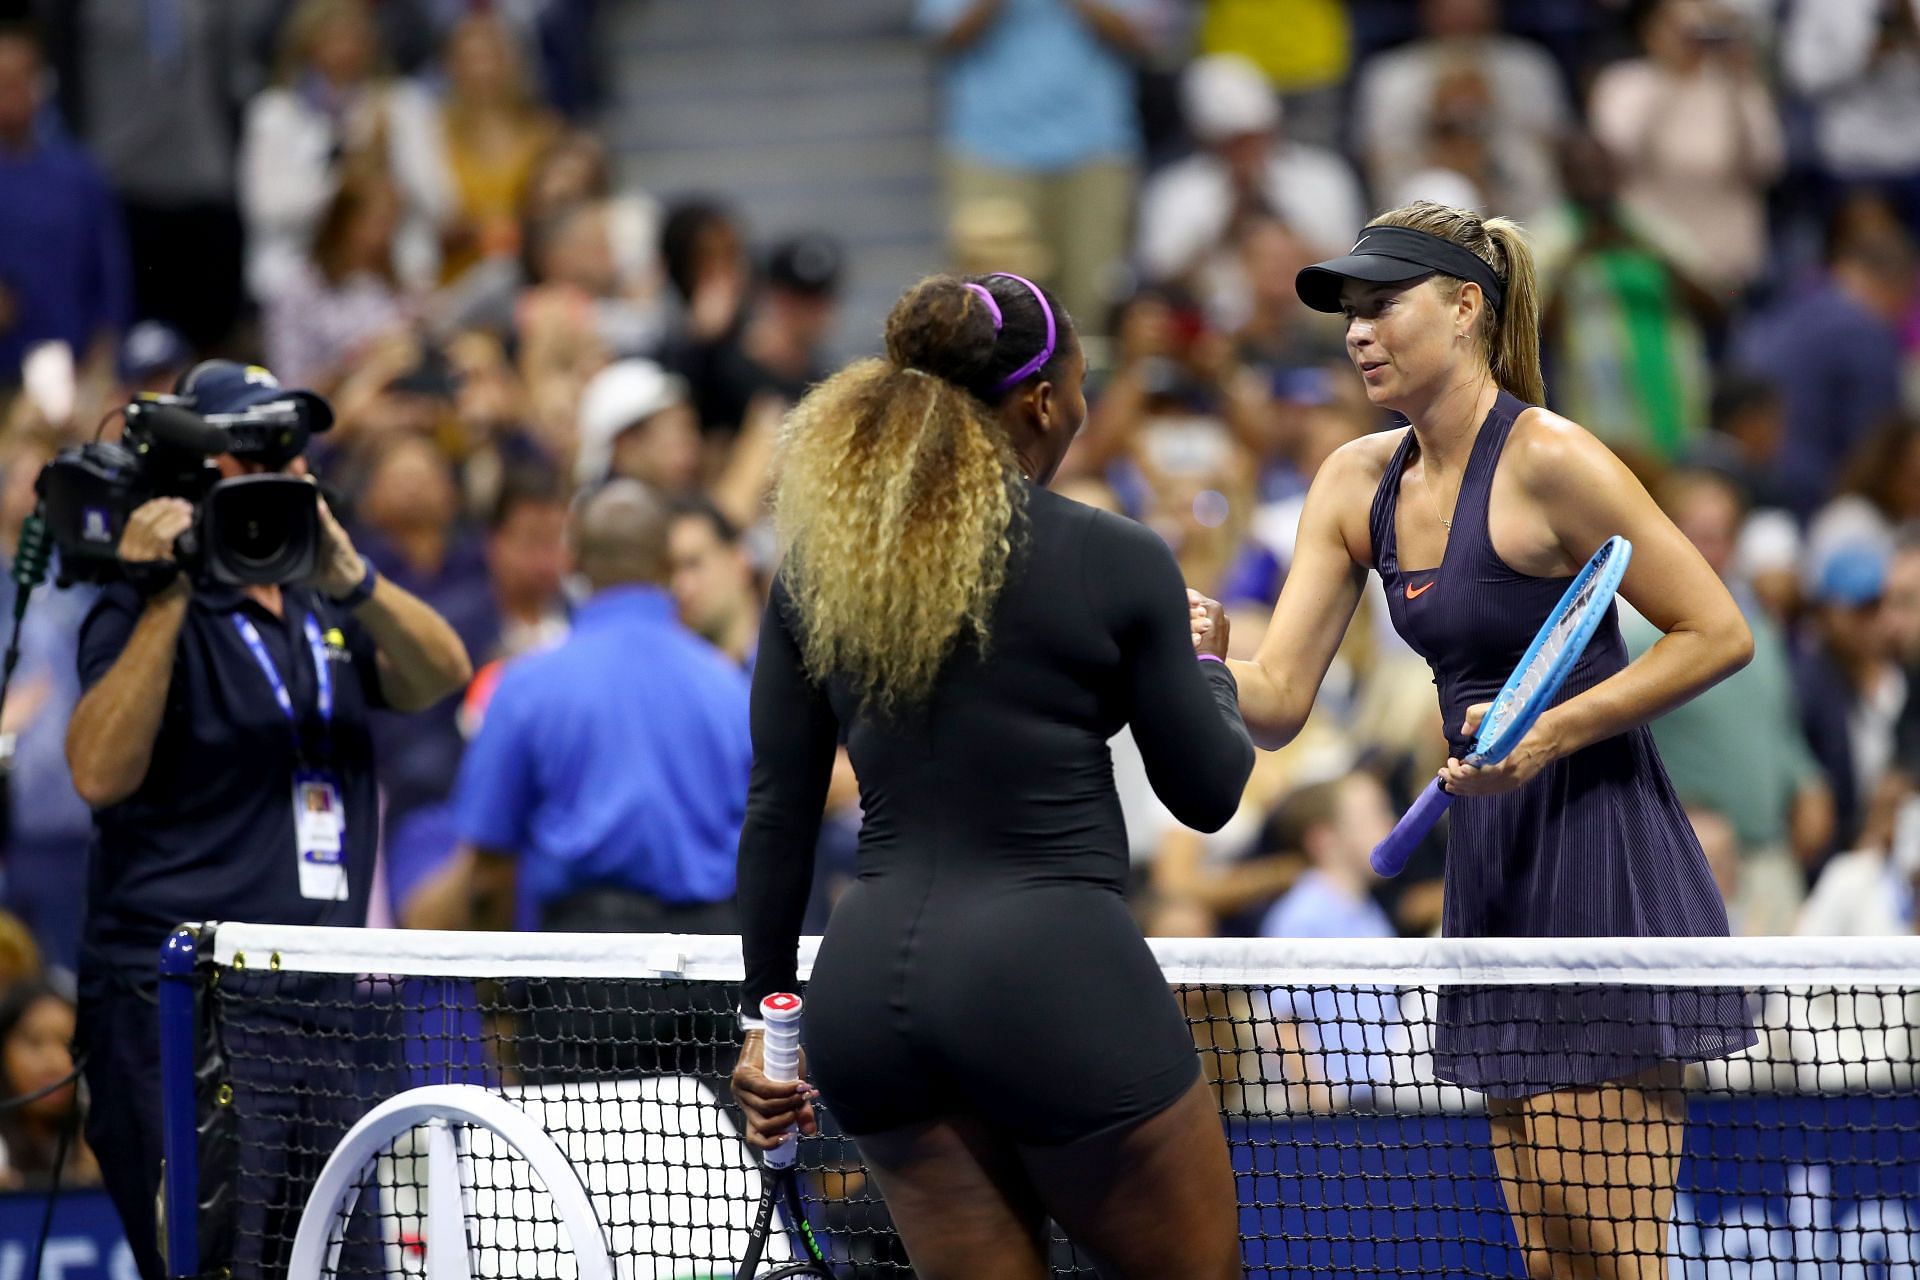 Serena Williams and Maria Sharapova after their final meeting at the 2019 US Open